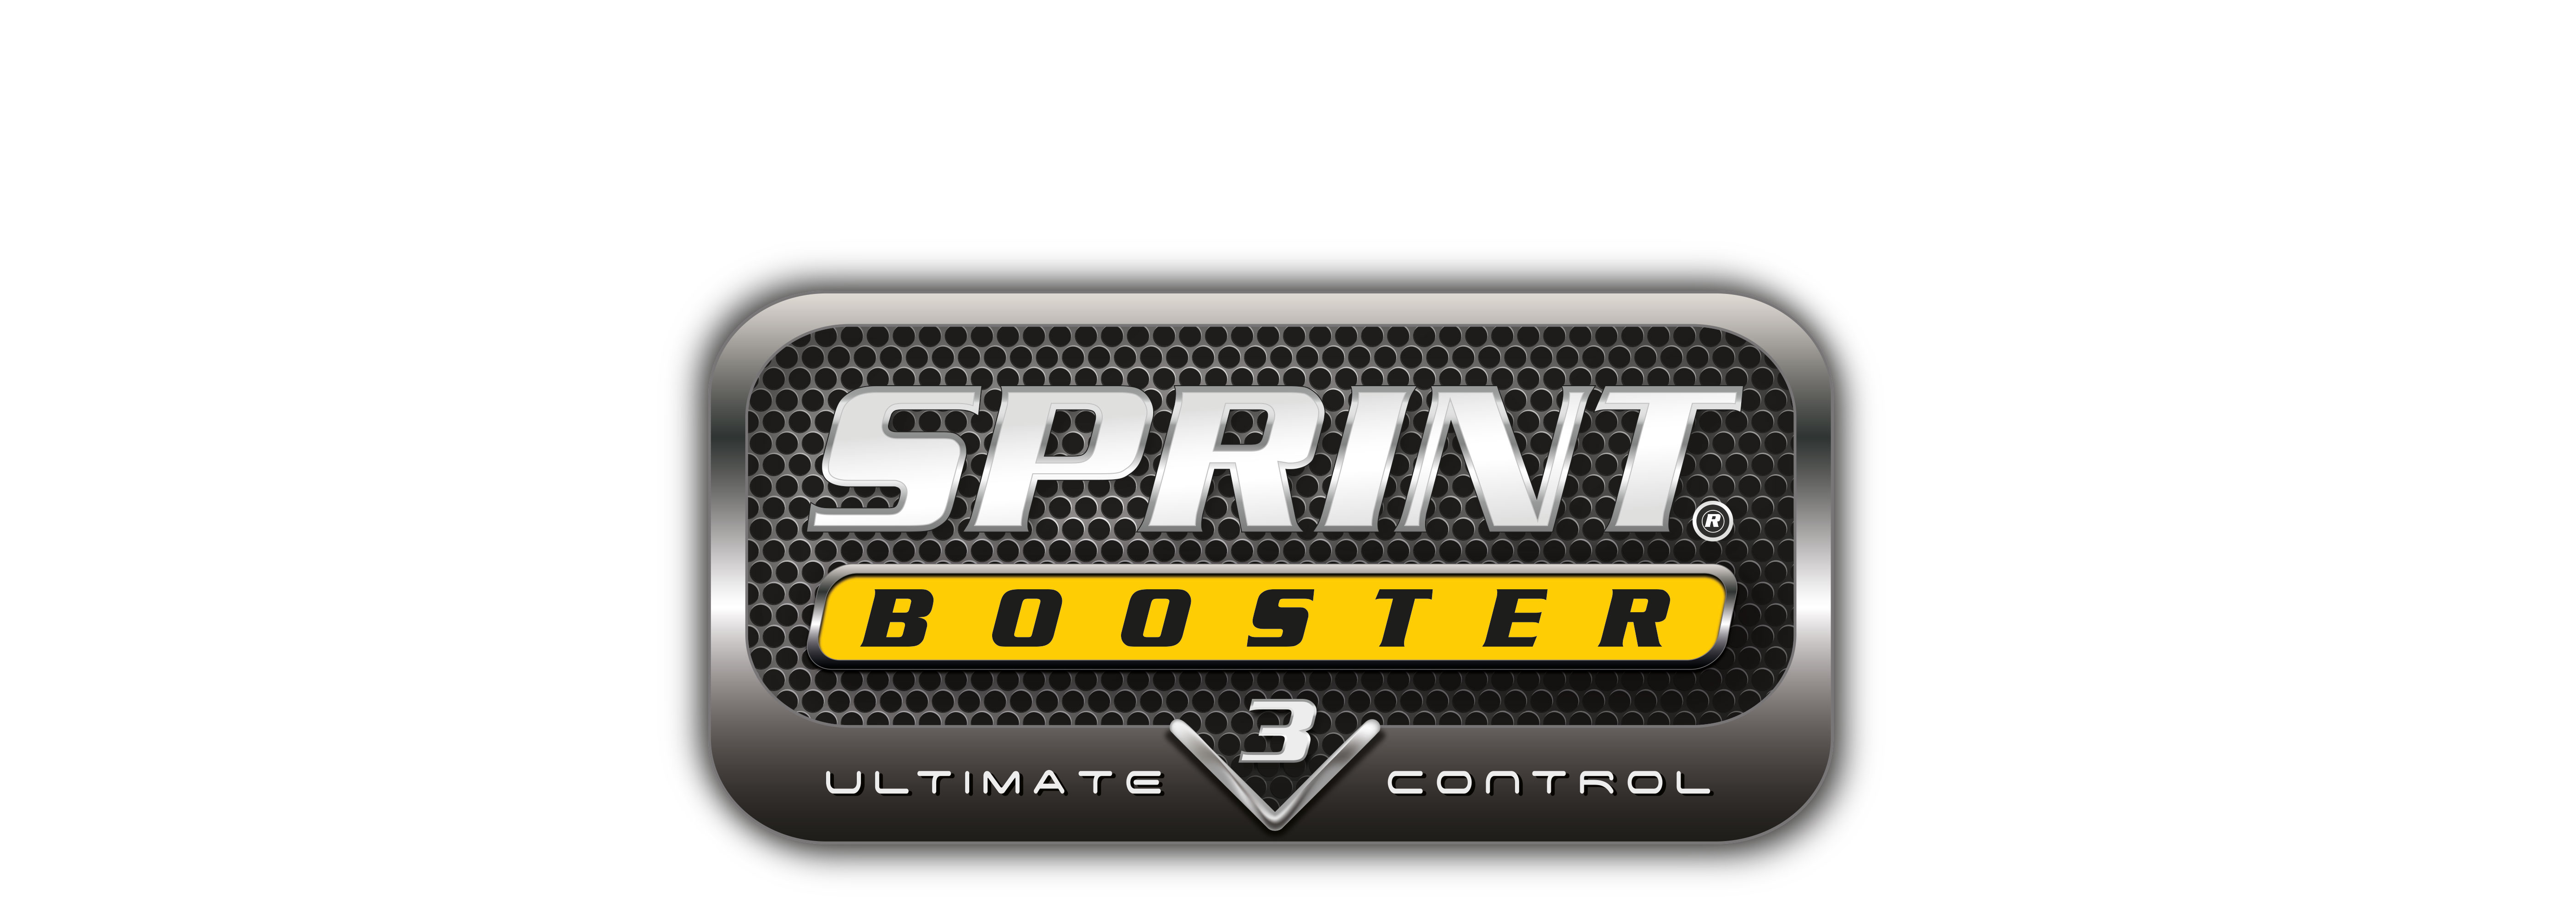 New Sprint Booster!